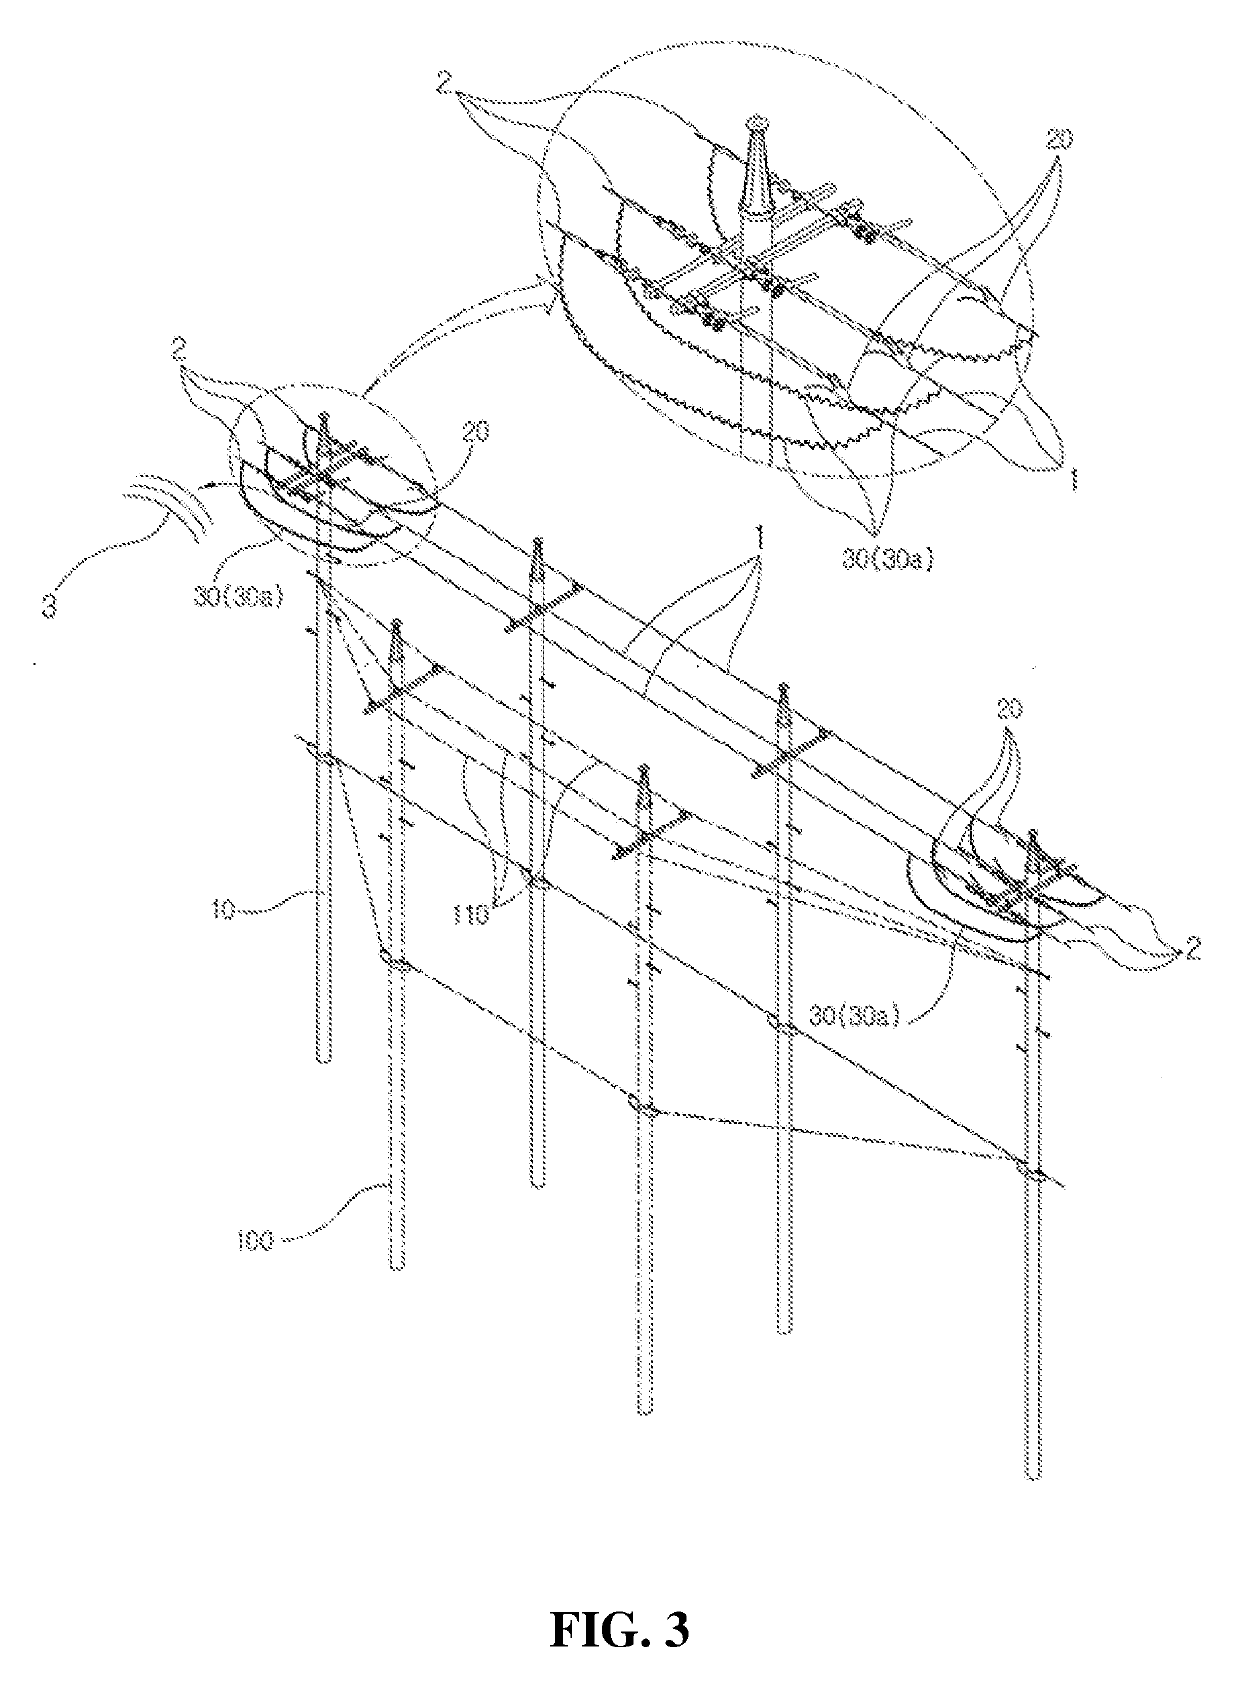 Method for performing uninterruptible power distribution work within section in de-energized line state by separating wires within pole-to-pole span by means of insulated live wire grip and bypass jumper cable